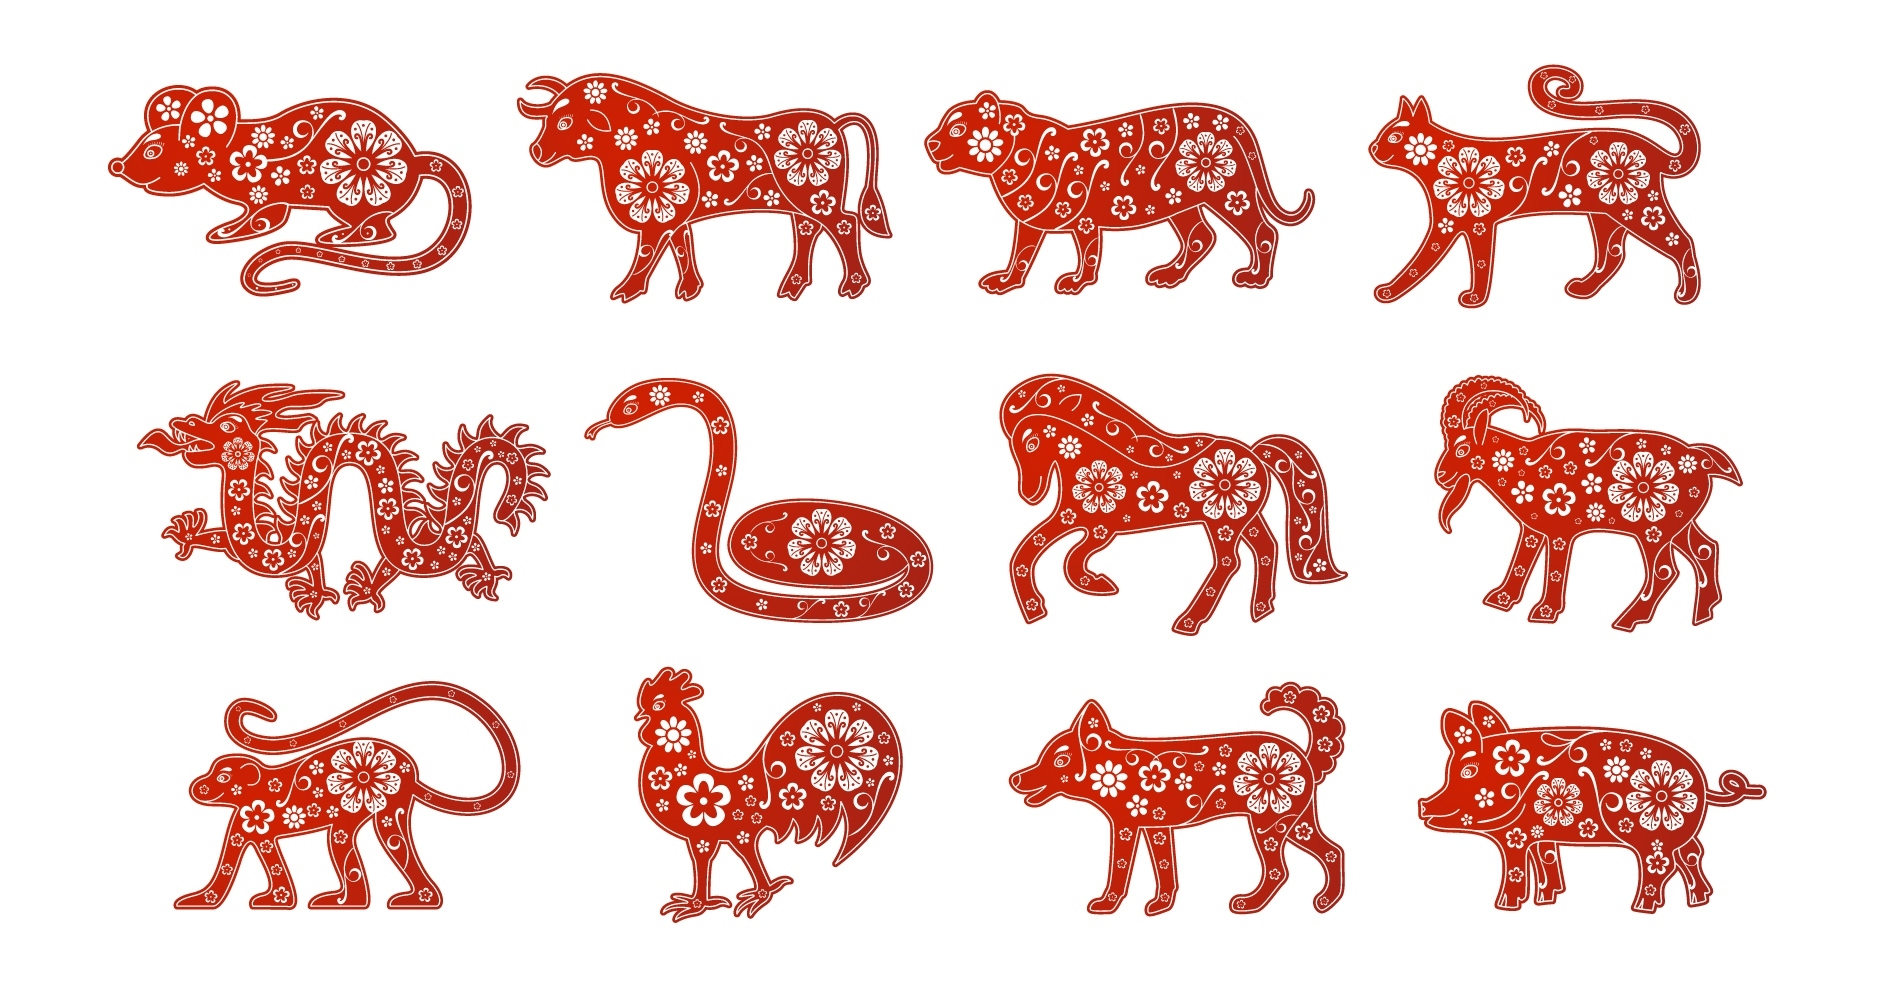 The Chinese Zodiac Signs: Are You A Dragon Or A Snake? - Farmers Chinese Zodiac Calendar History